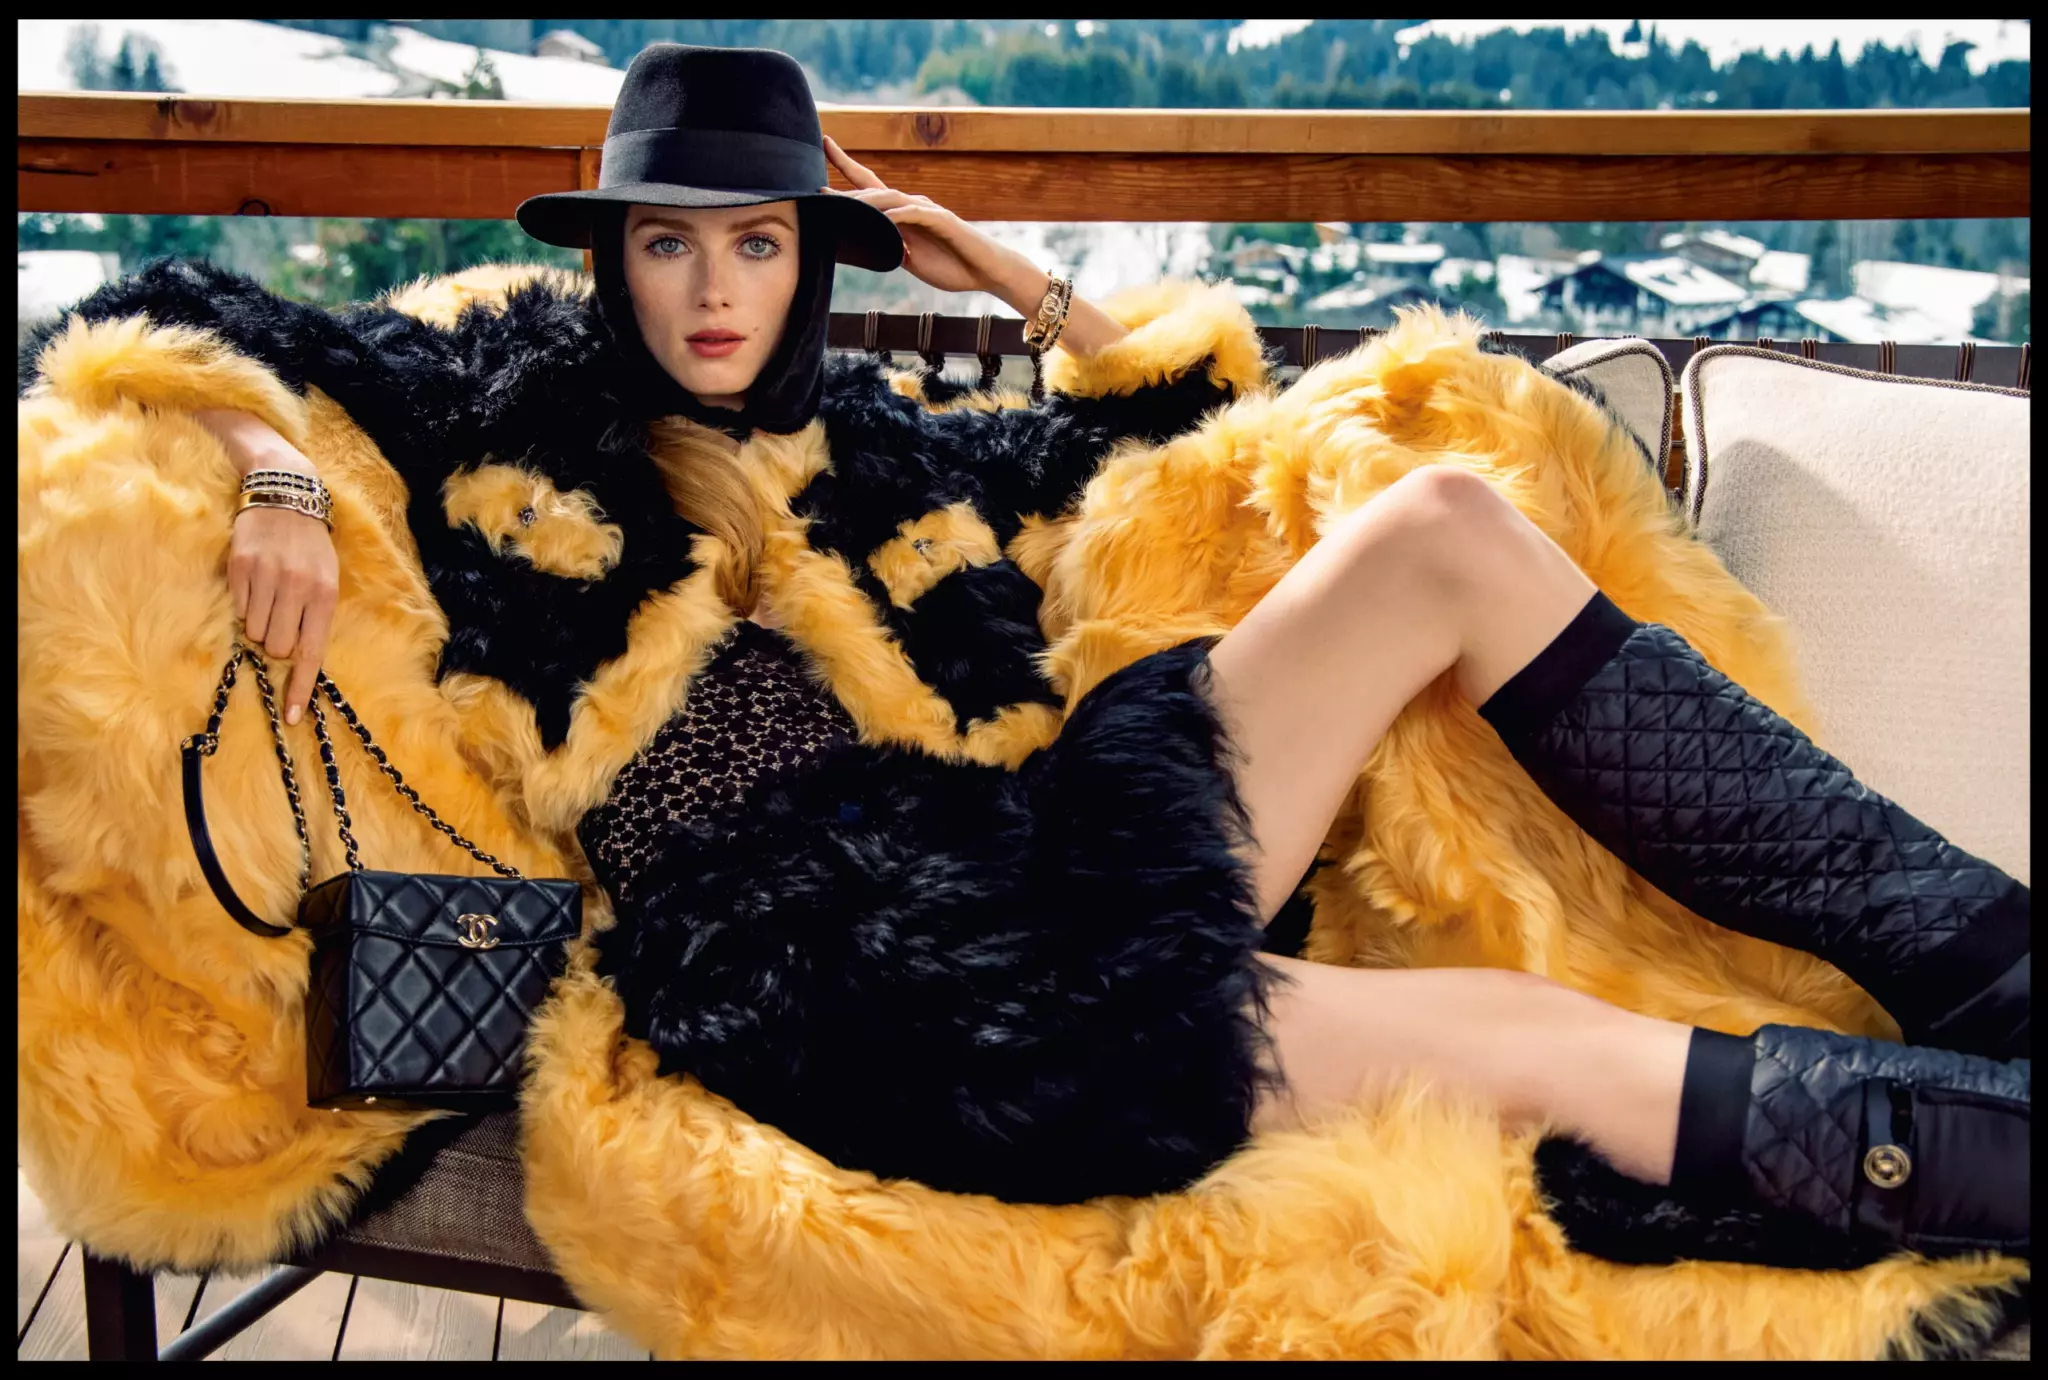 Fall-Winter 21/22 trends that fashionistas will adopt this season. Focus on iconic Chanel, Baum und Pferdgarten, By Malina and By Malene Birger. 4